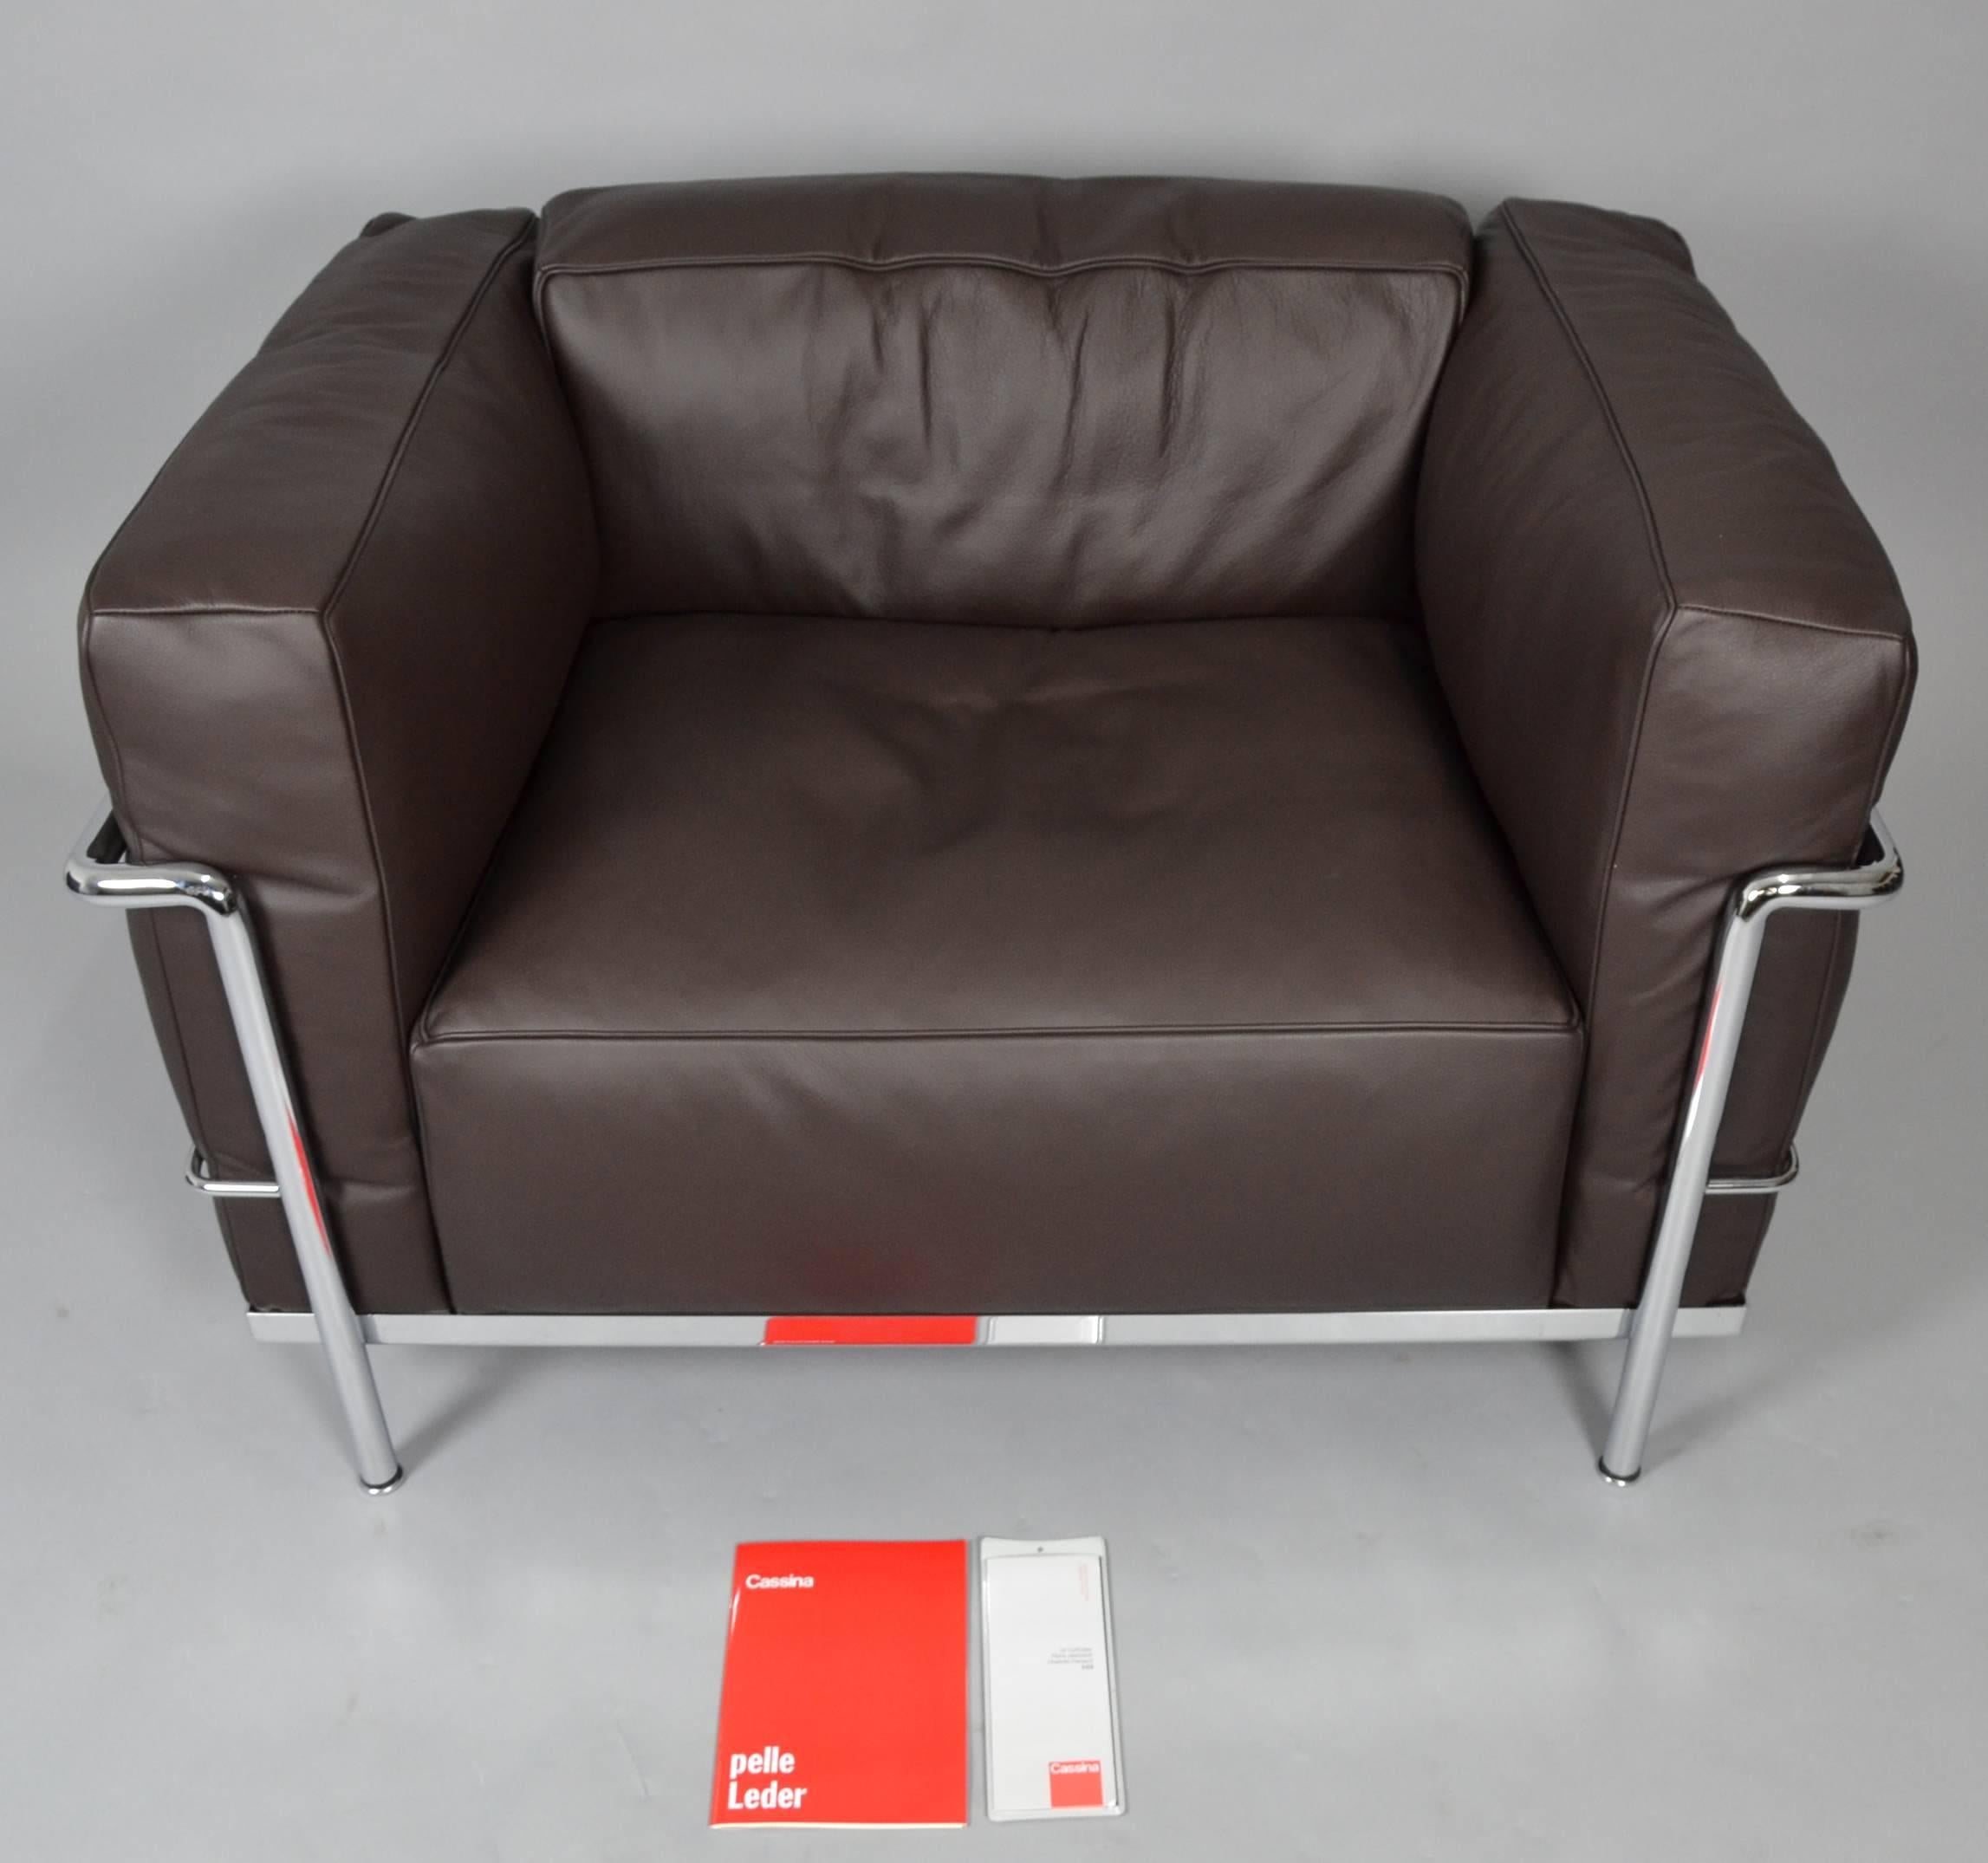 Designed by Le Corbusier, Pierre Jeanneret and Charlotte Perriand in 1928. Produced and signed by Cassina. Stainless steel with down cushions in black leather.